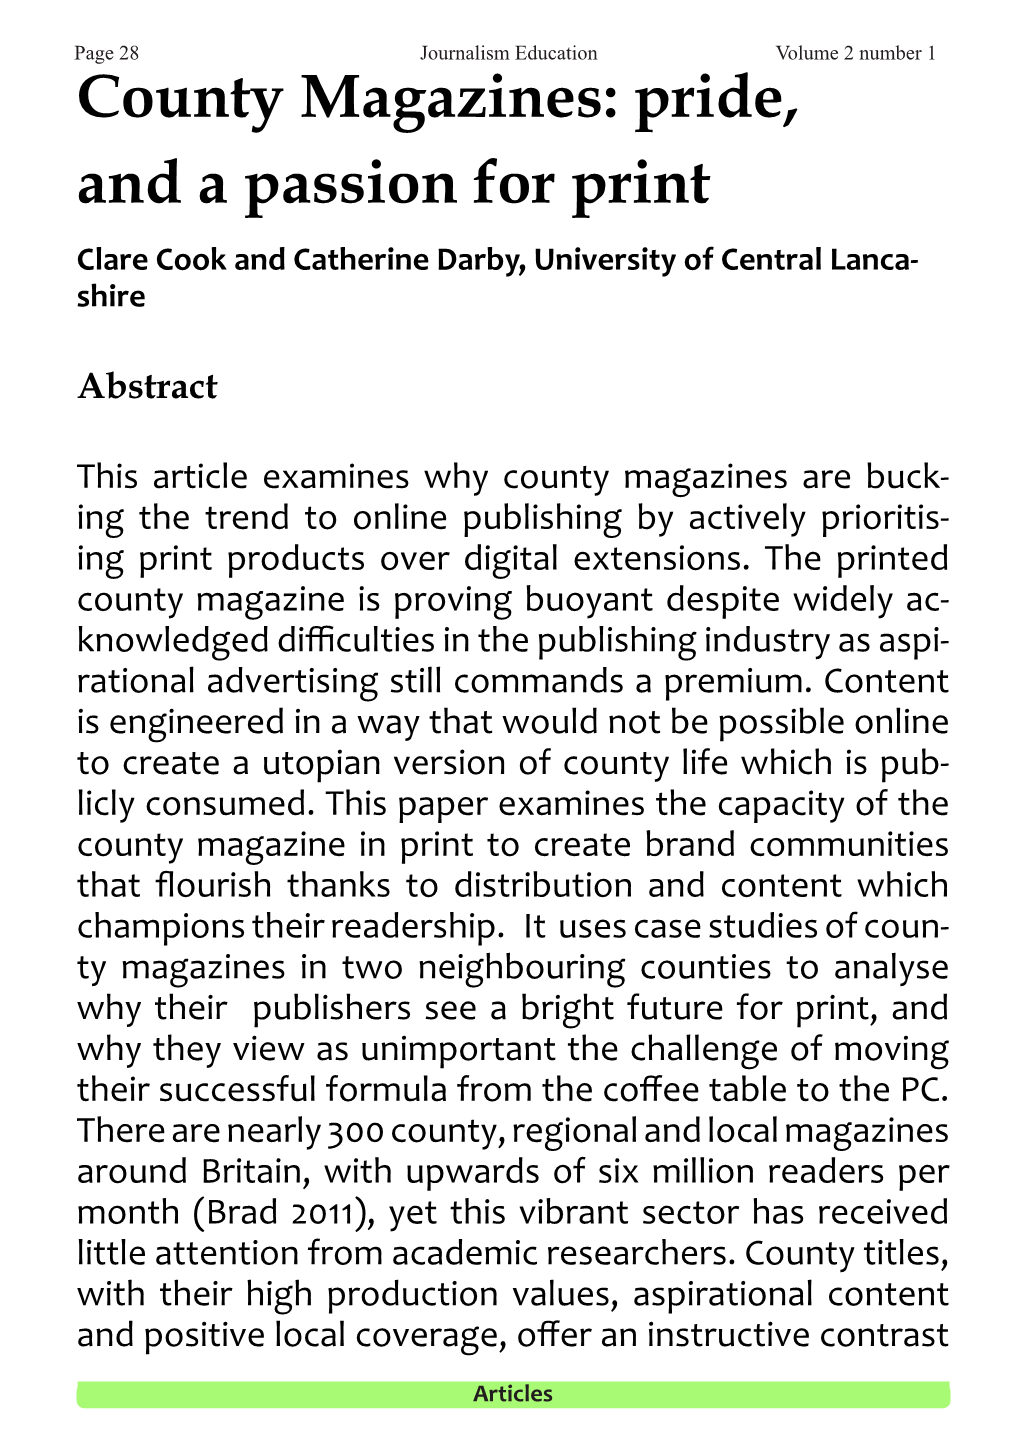 County Magazines: Pride, and a Passion for Print Clare Cook and Catherine Darby, University of Central Lanca- Shire